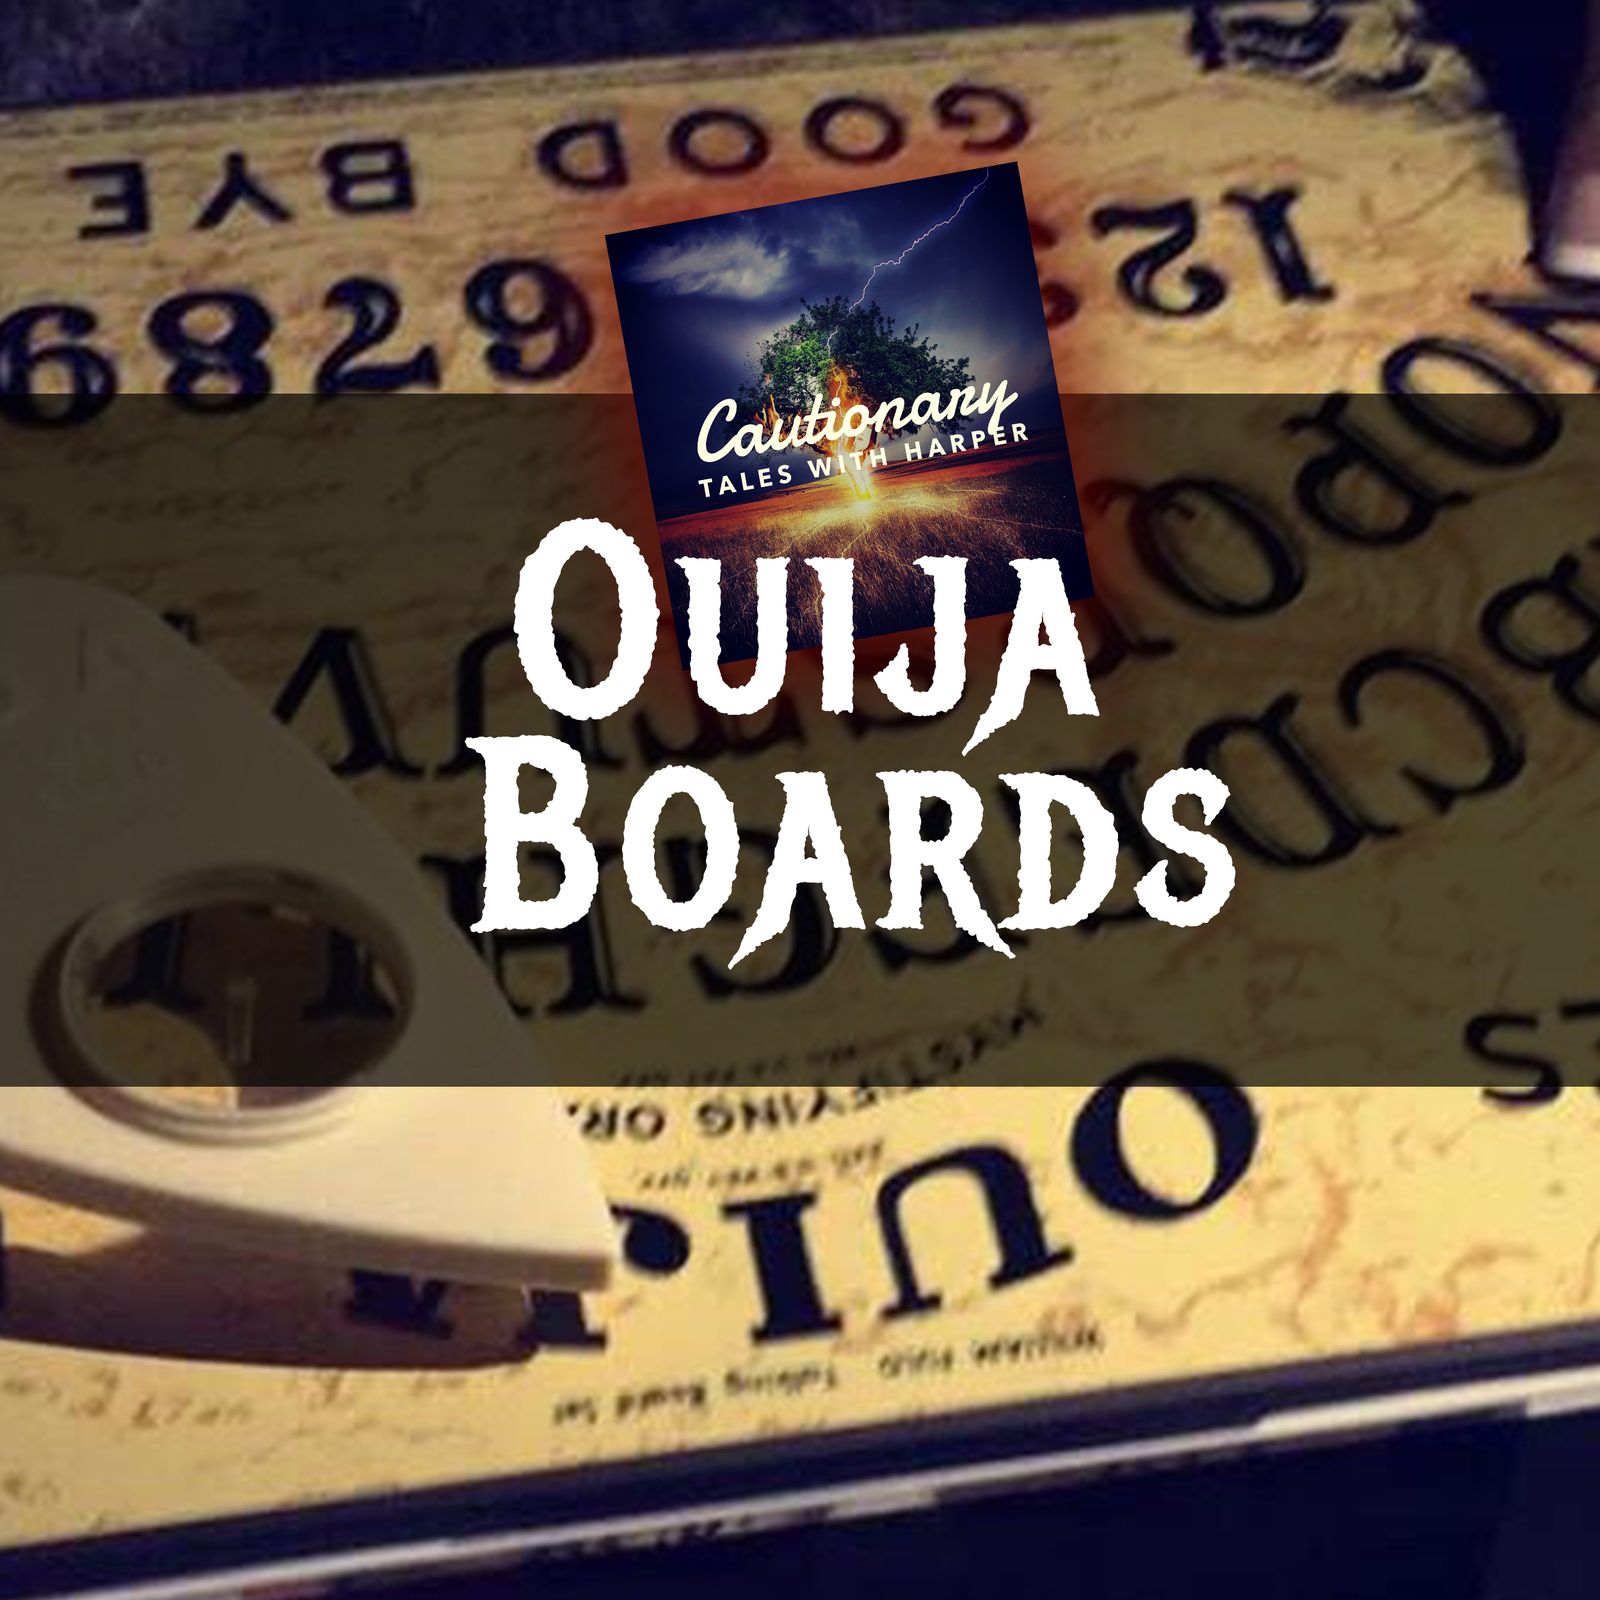 2: Dangers of Playing With Ouija Boards